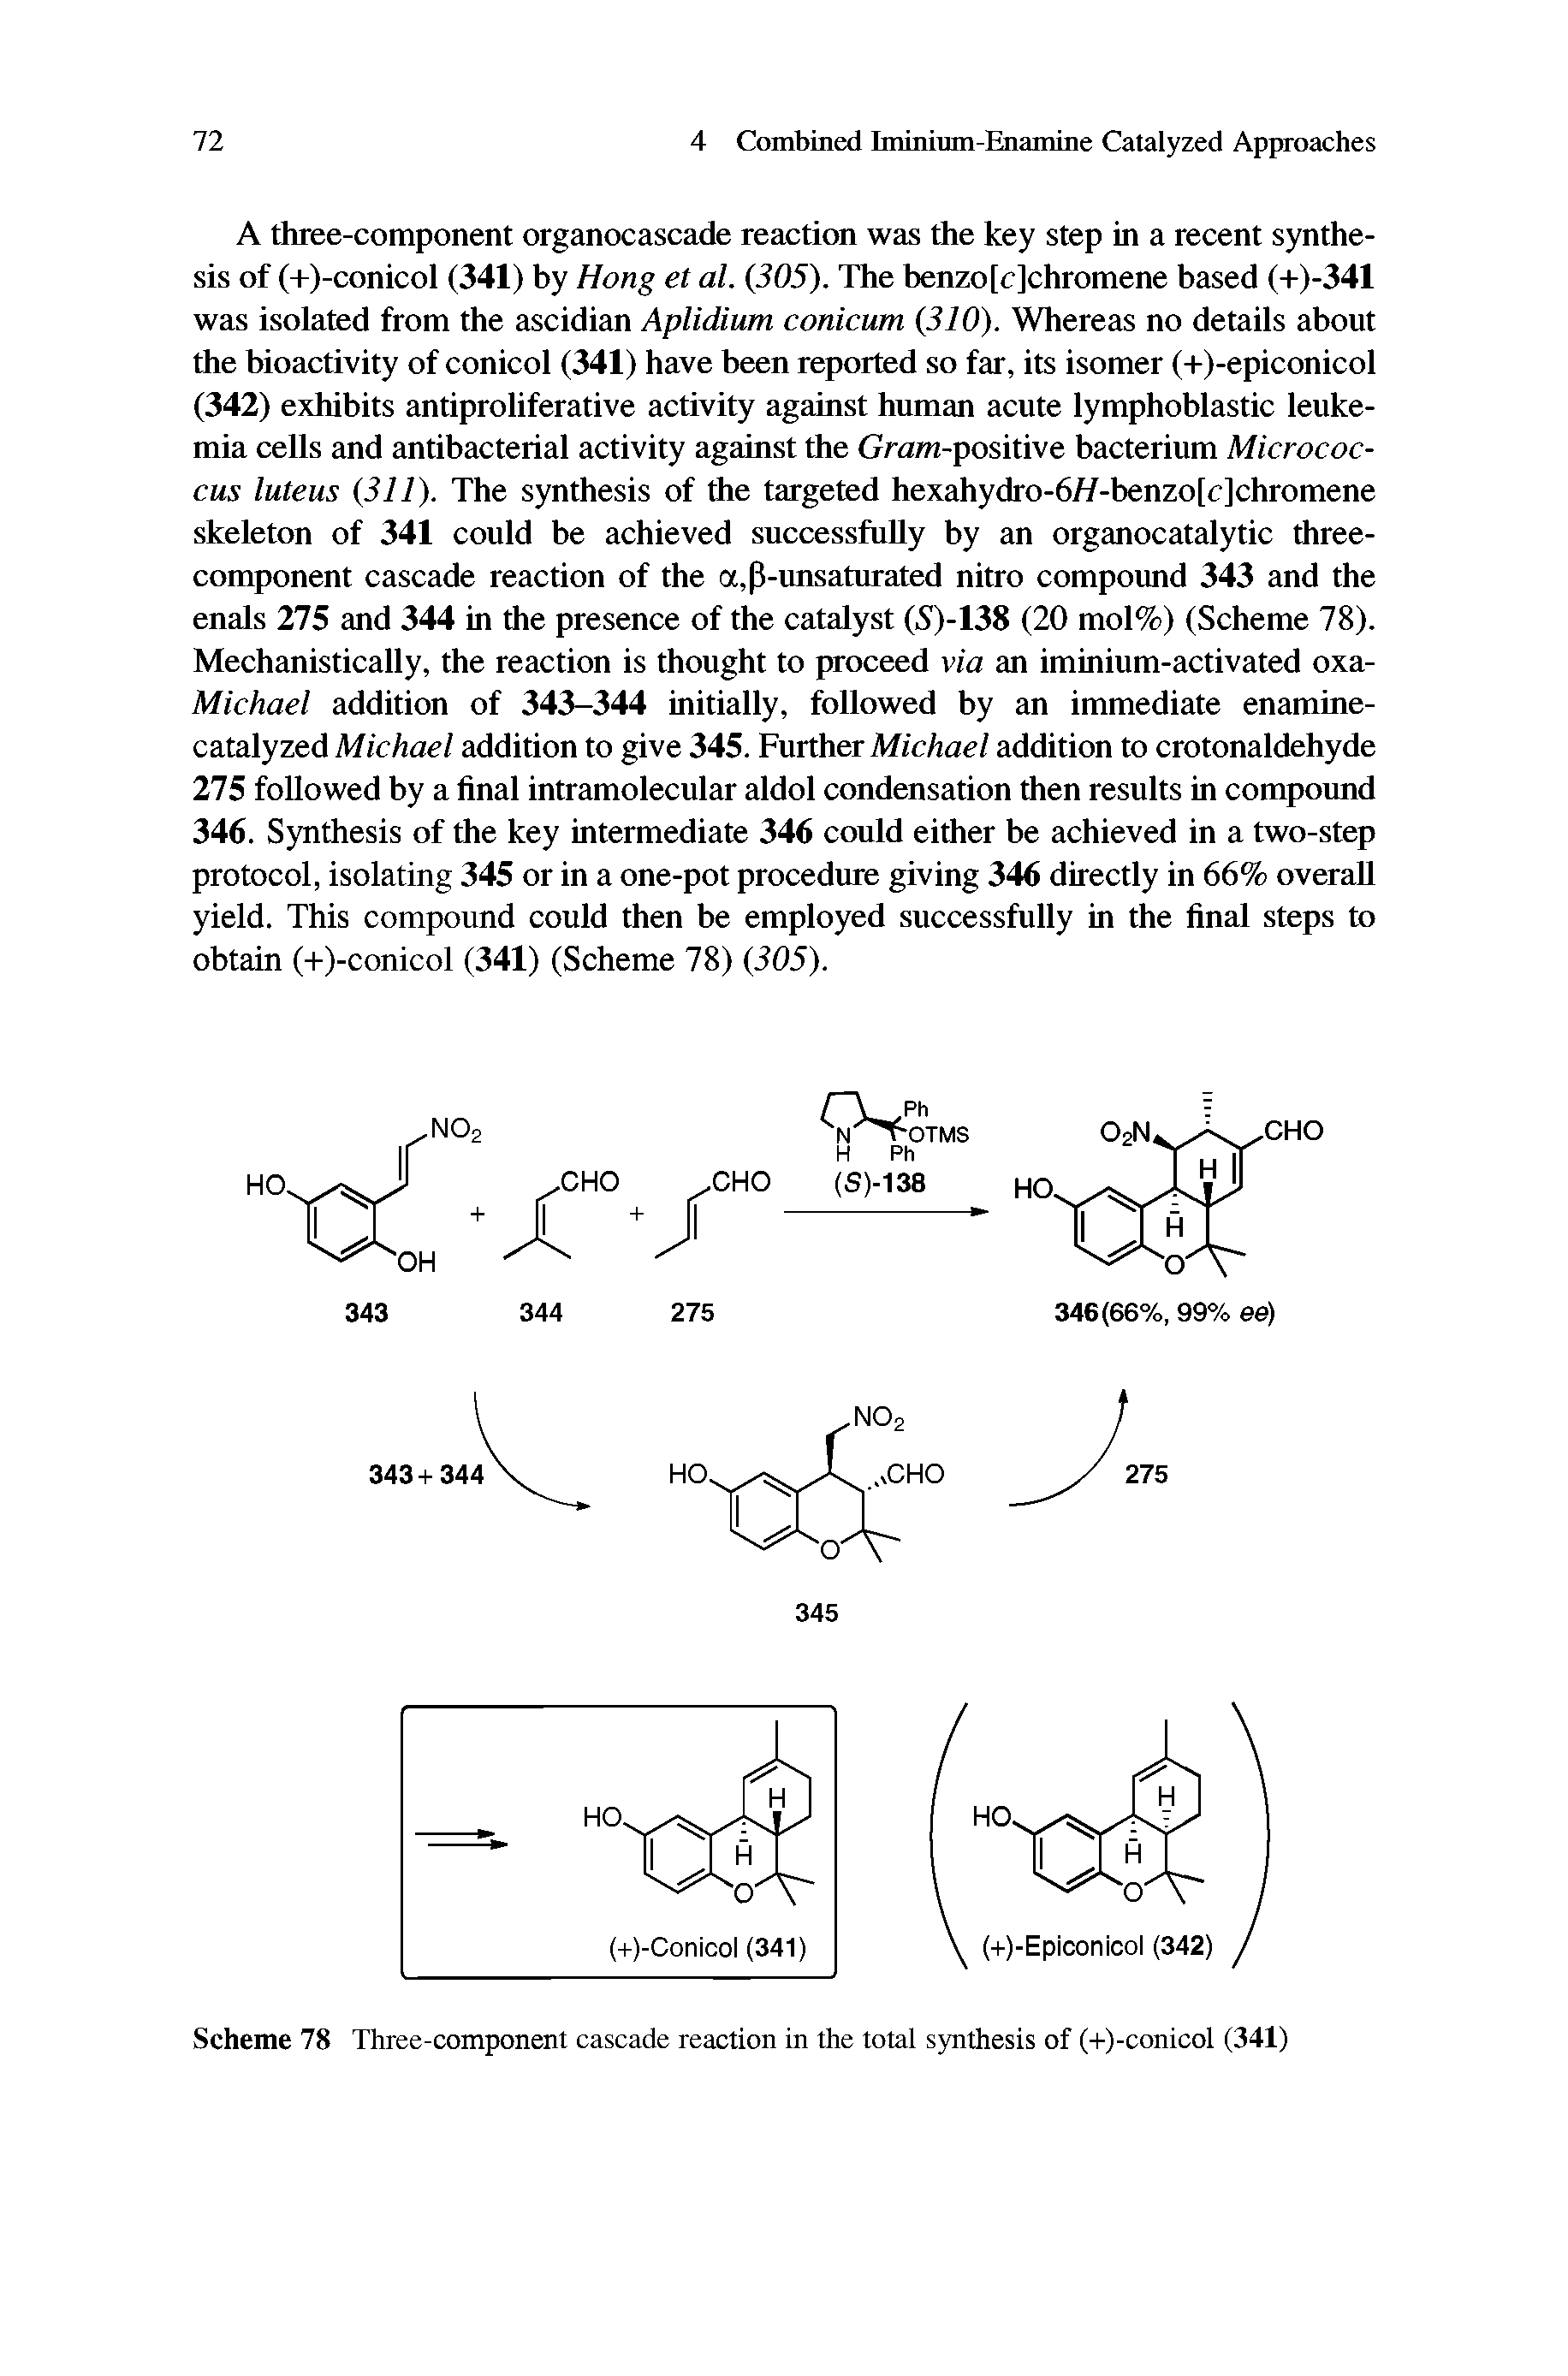 Scheme 78 Three-component cascade reaction in the total synthesis of (+)-conicol (341)...